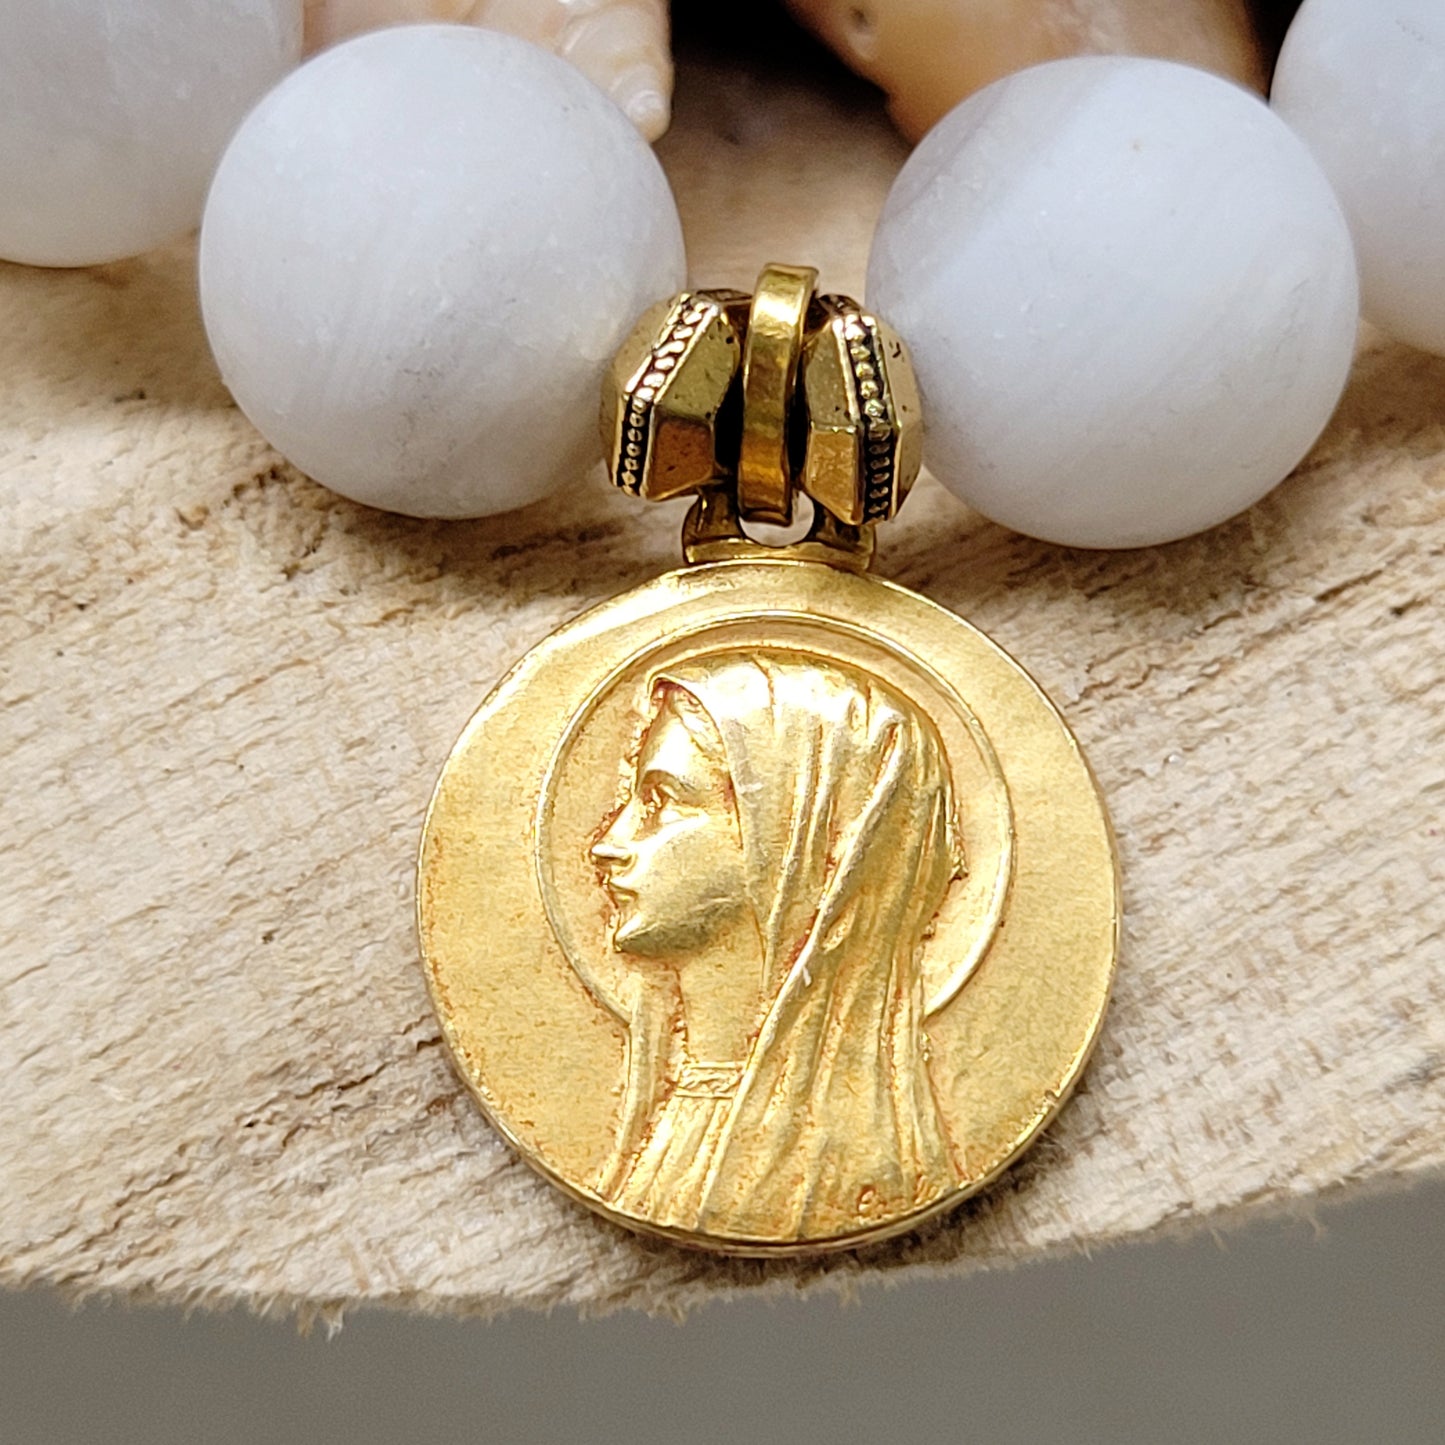 Druzy Agate 10mm Beaded Bracelet with Gold plated Virgin Mary Medal from France - Afterlife Jewelry Designs